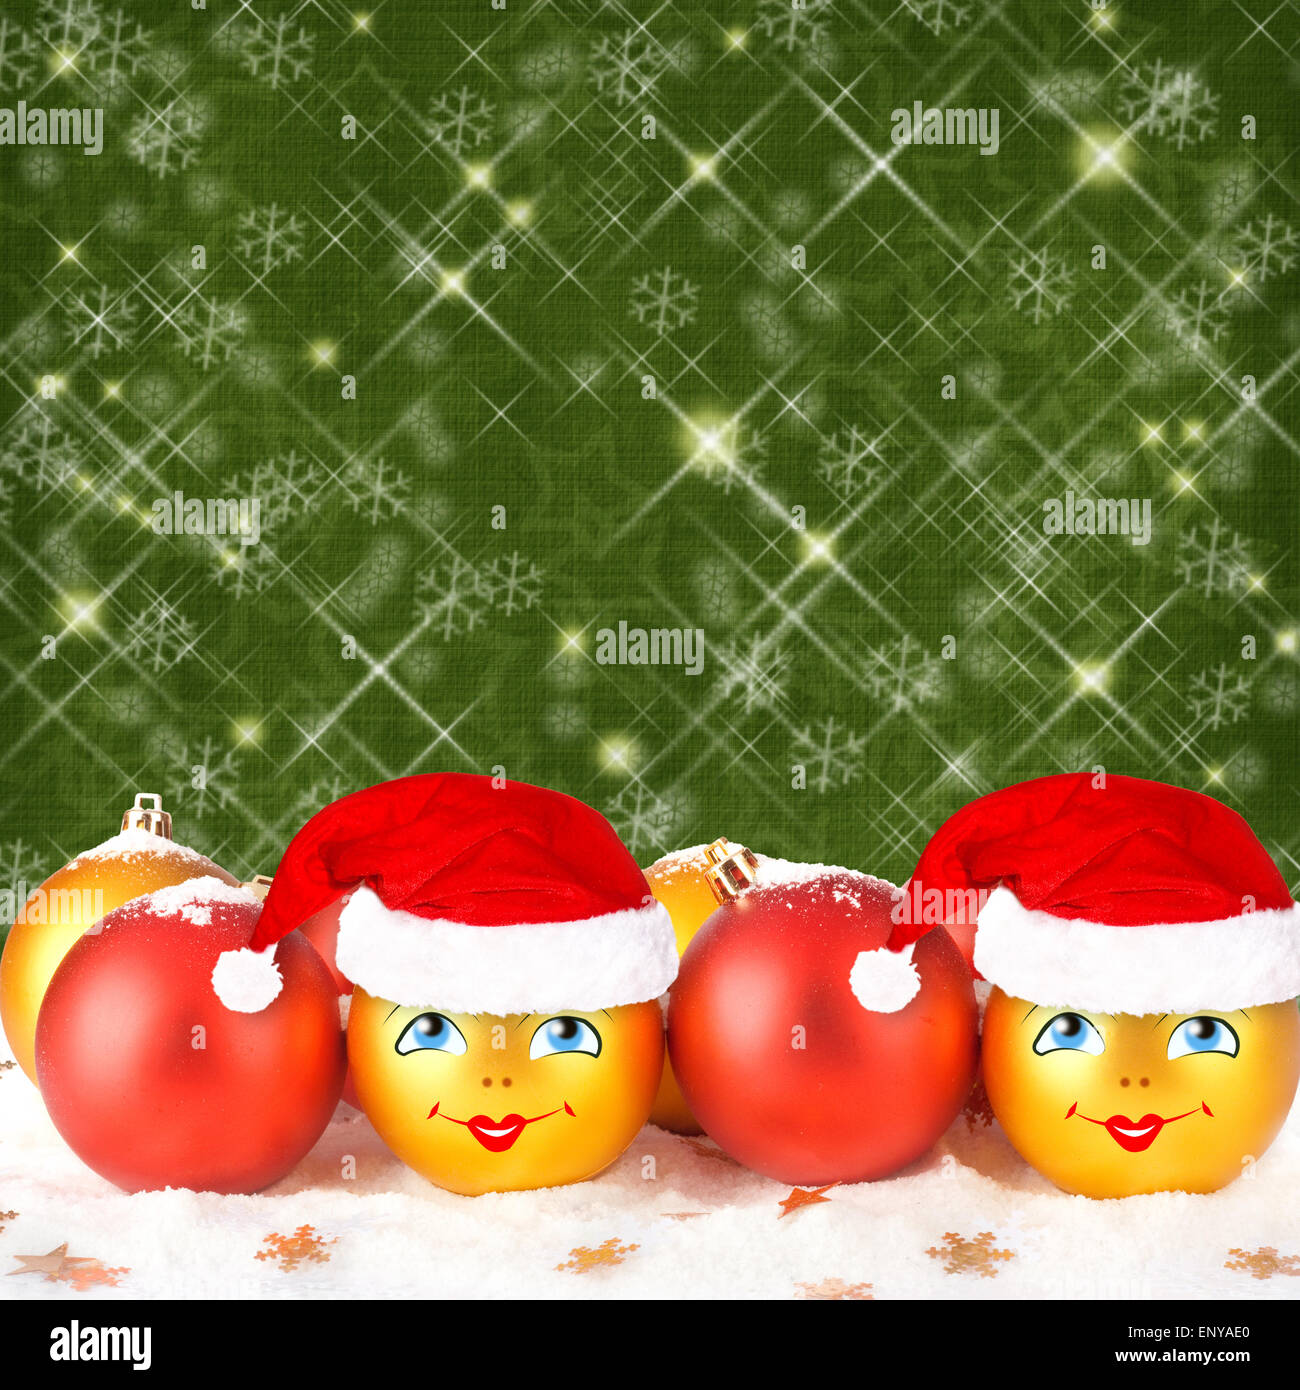 Christmas ball in the hat of Santa Claus  on the abstract background with stars Stock Photo